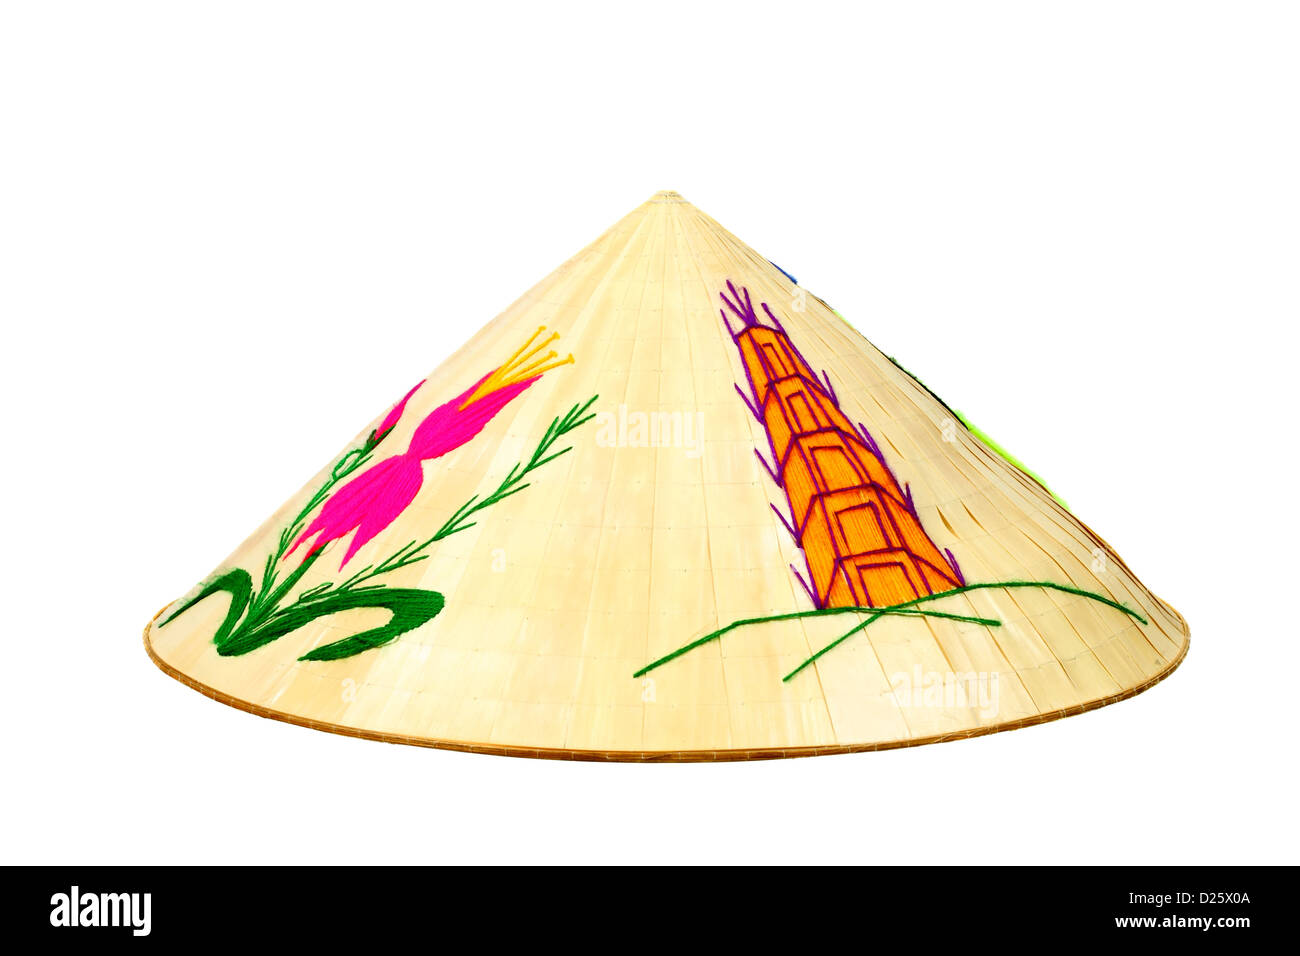 Nón lá - Asian traditional conical bamboo hat isolated on white background Stock Photo